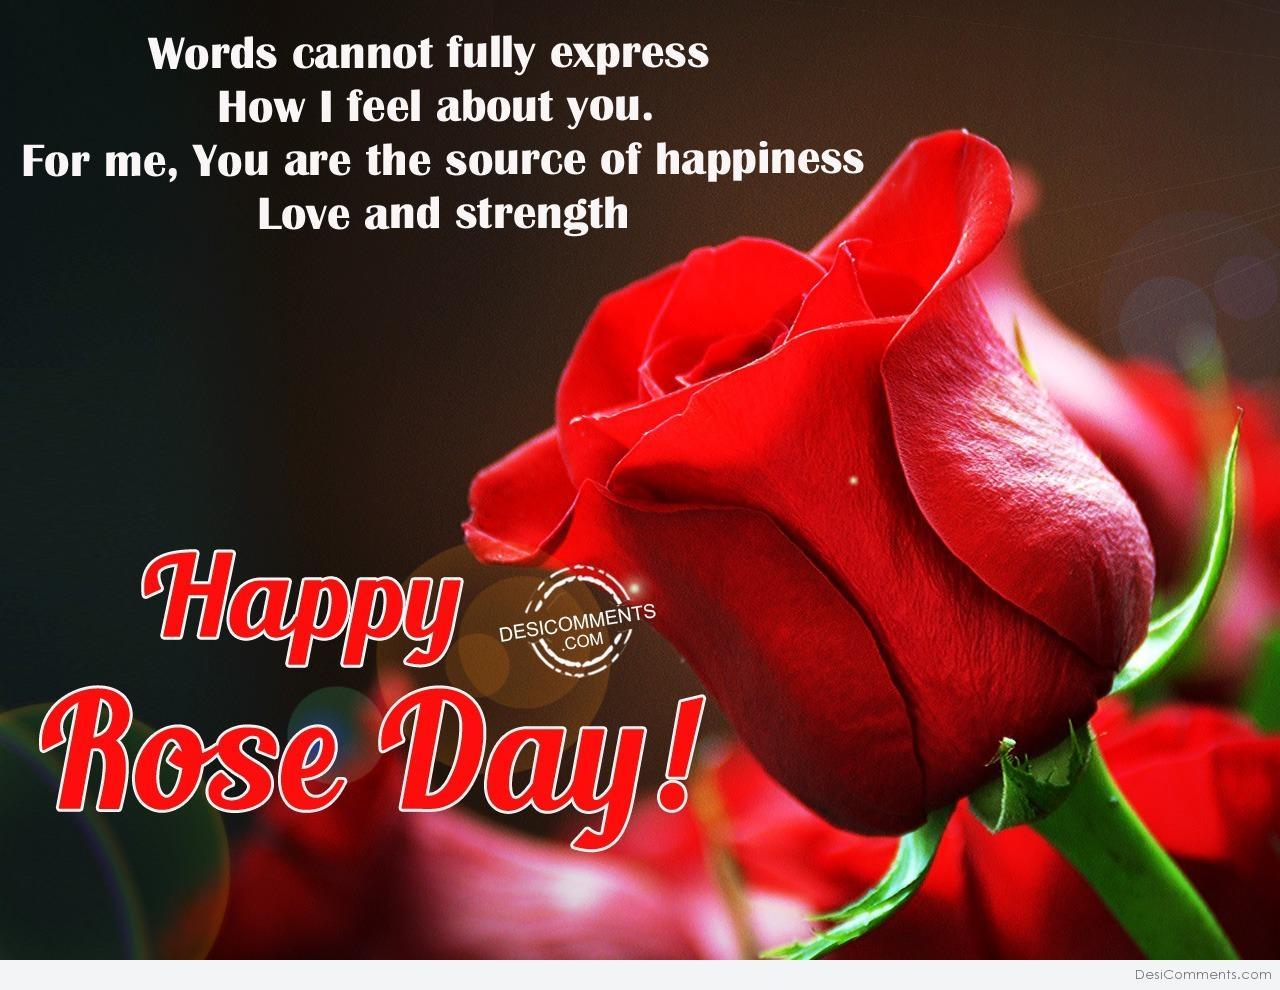 Rose Day Picture, Image, Graphics